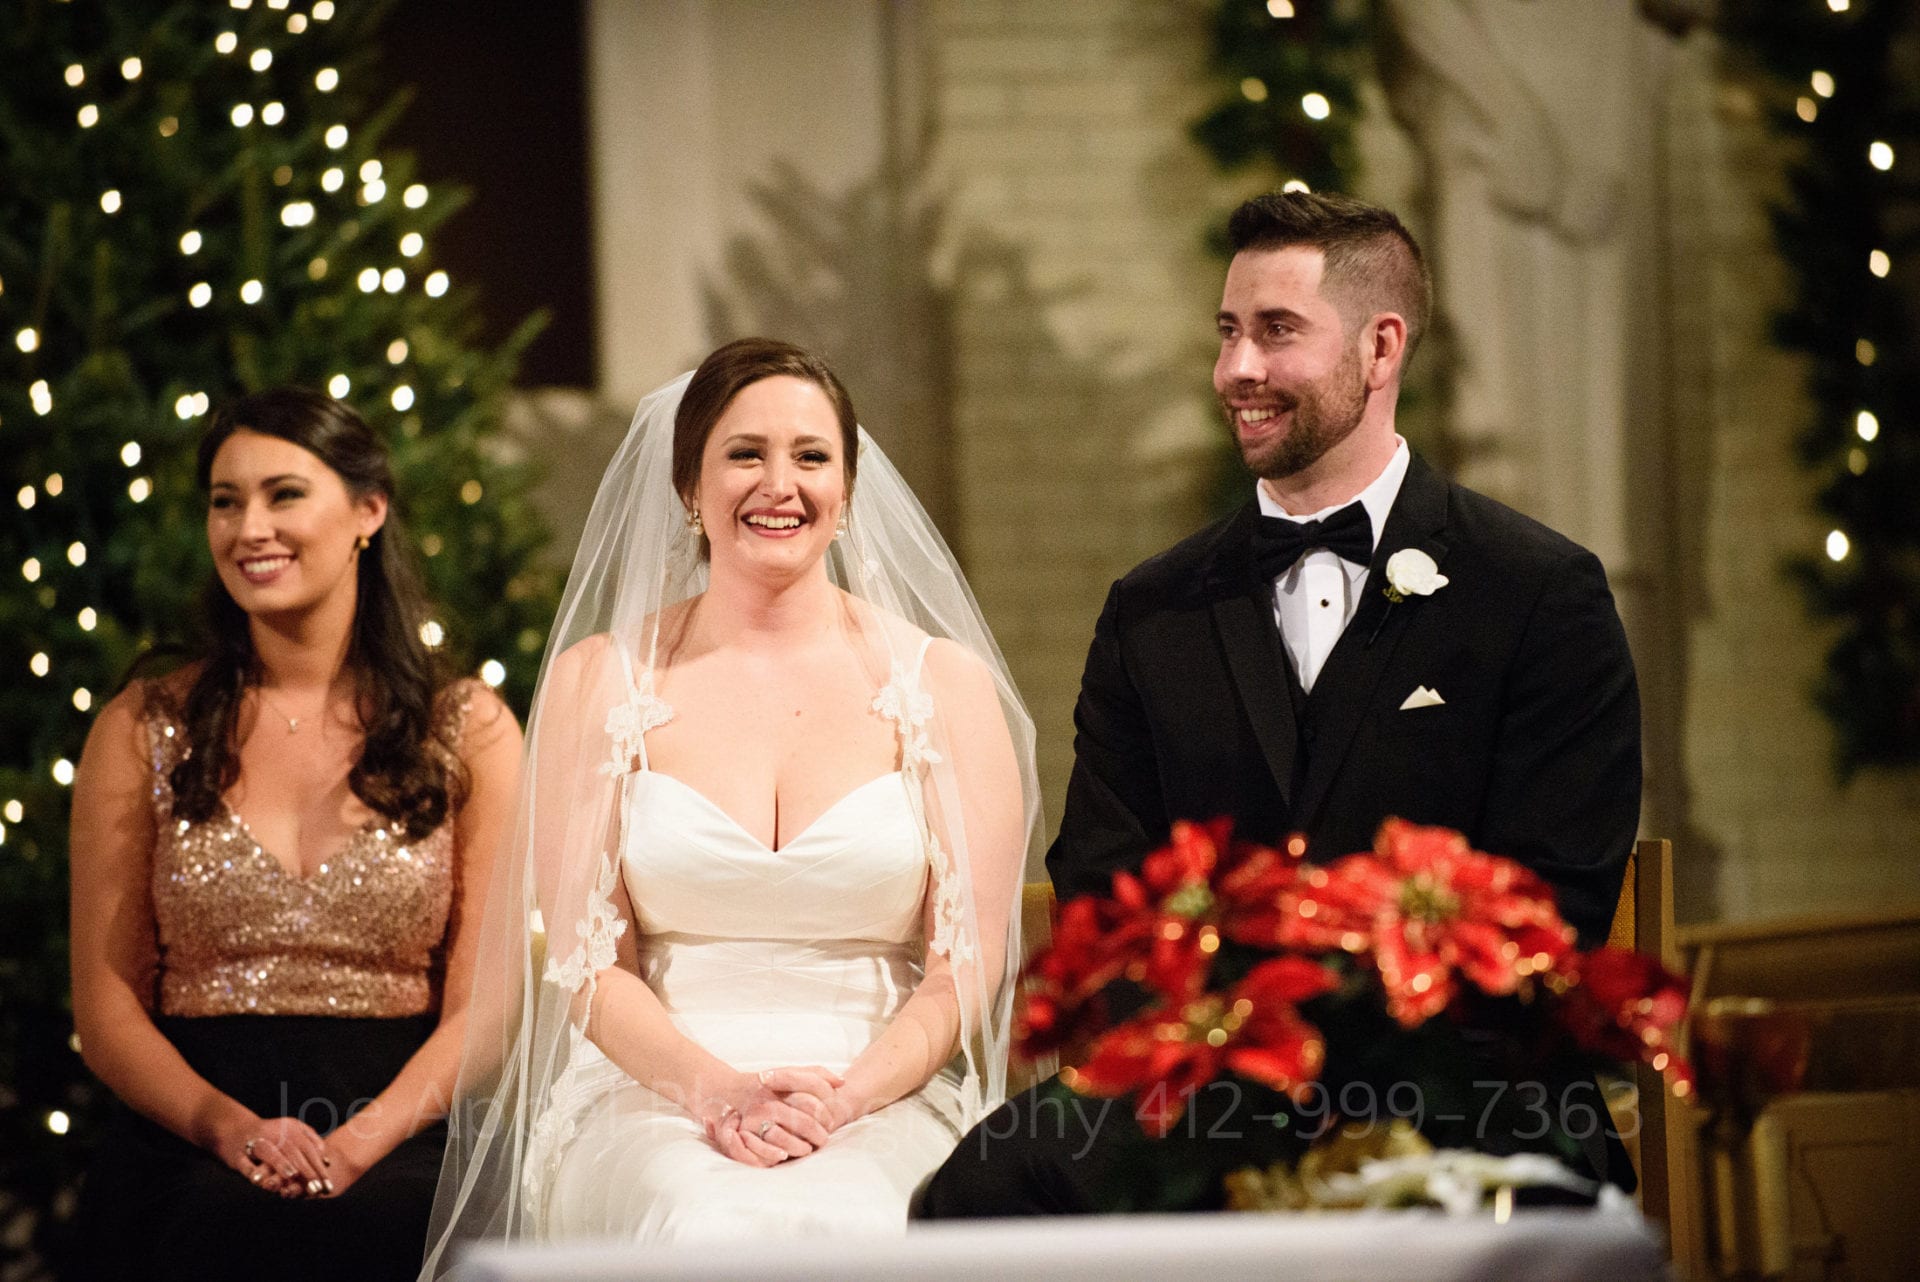 Bride and groom smile as they sit together on an altar. Lighted Christmas trees are behind them and a poinsettia is in the foreground. The maid of honor sits to the left of the bride.